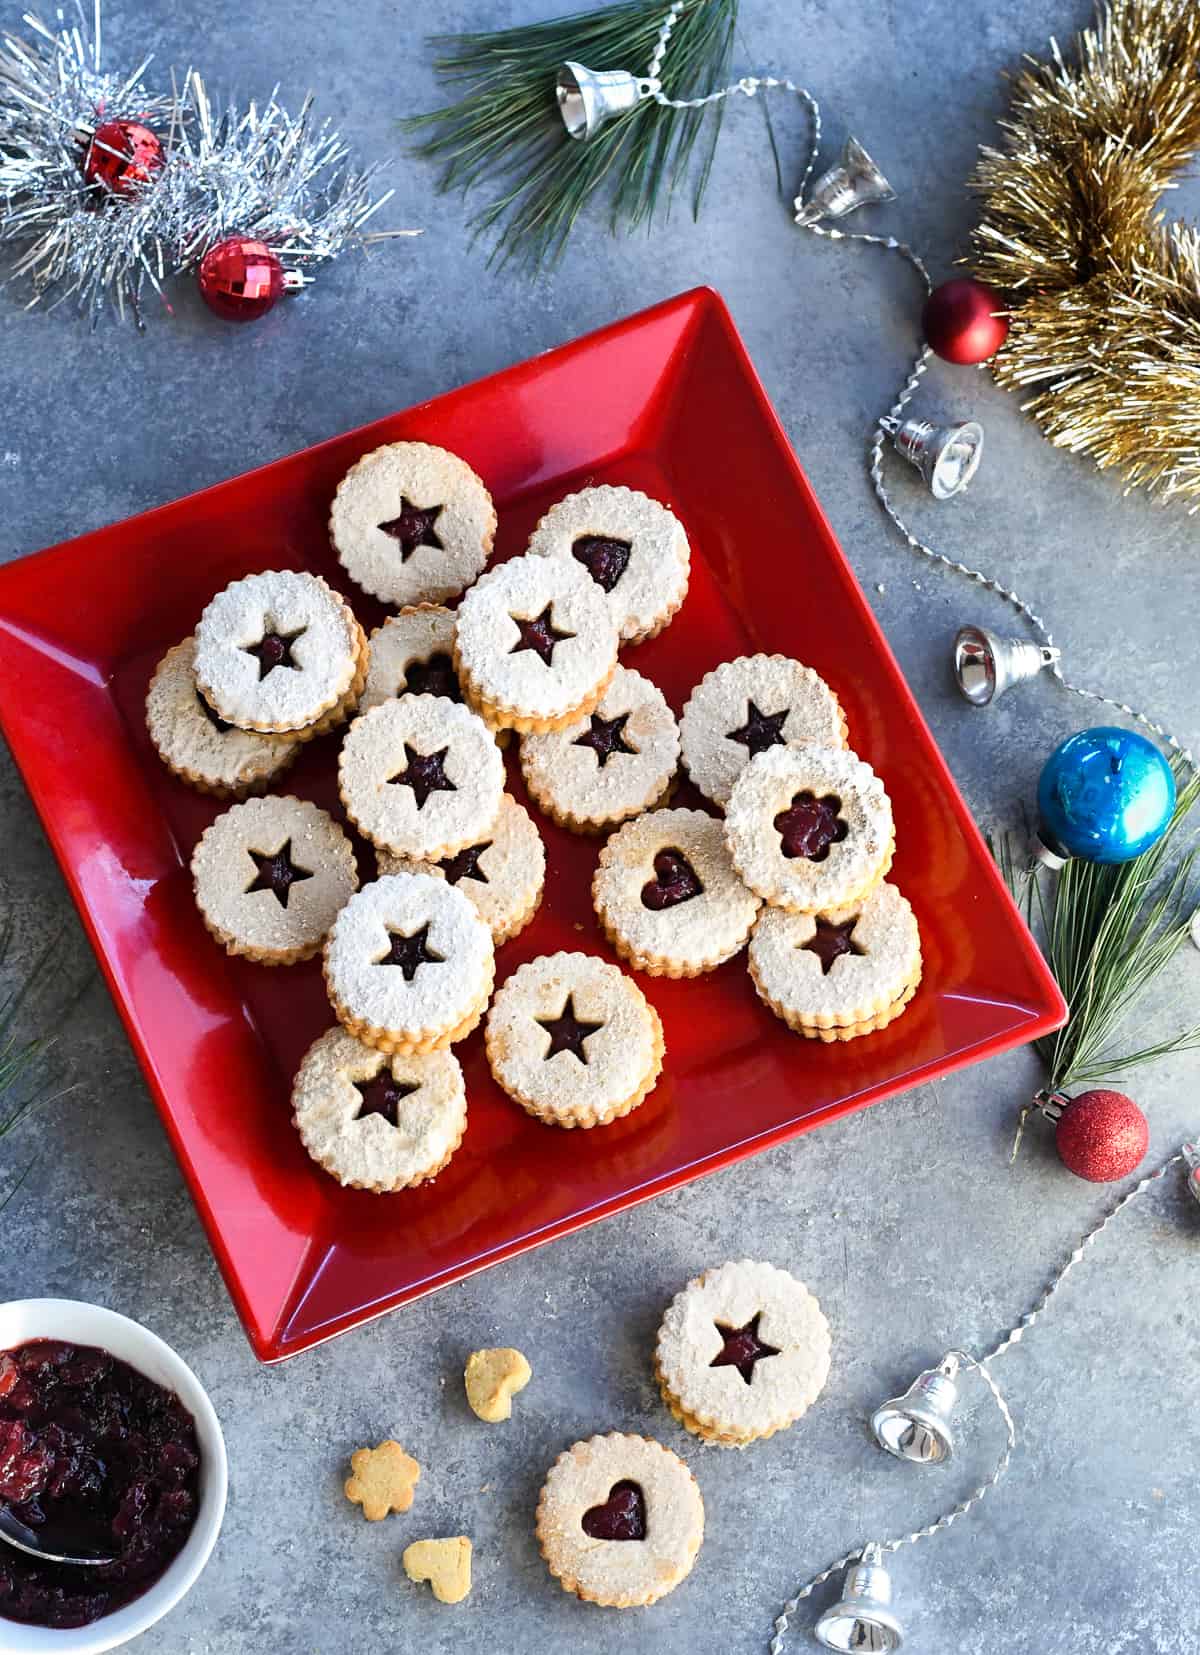 Gluten Free Linzer Cookies on red plate